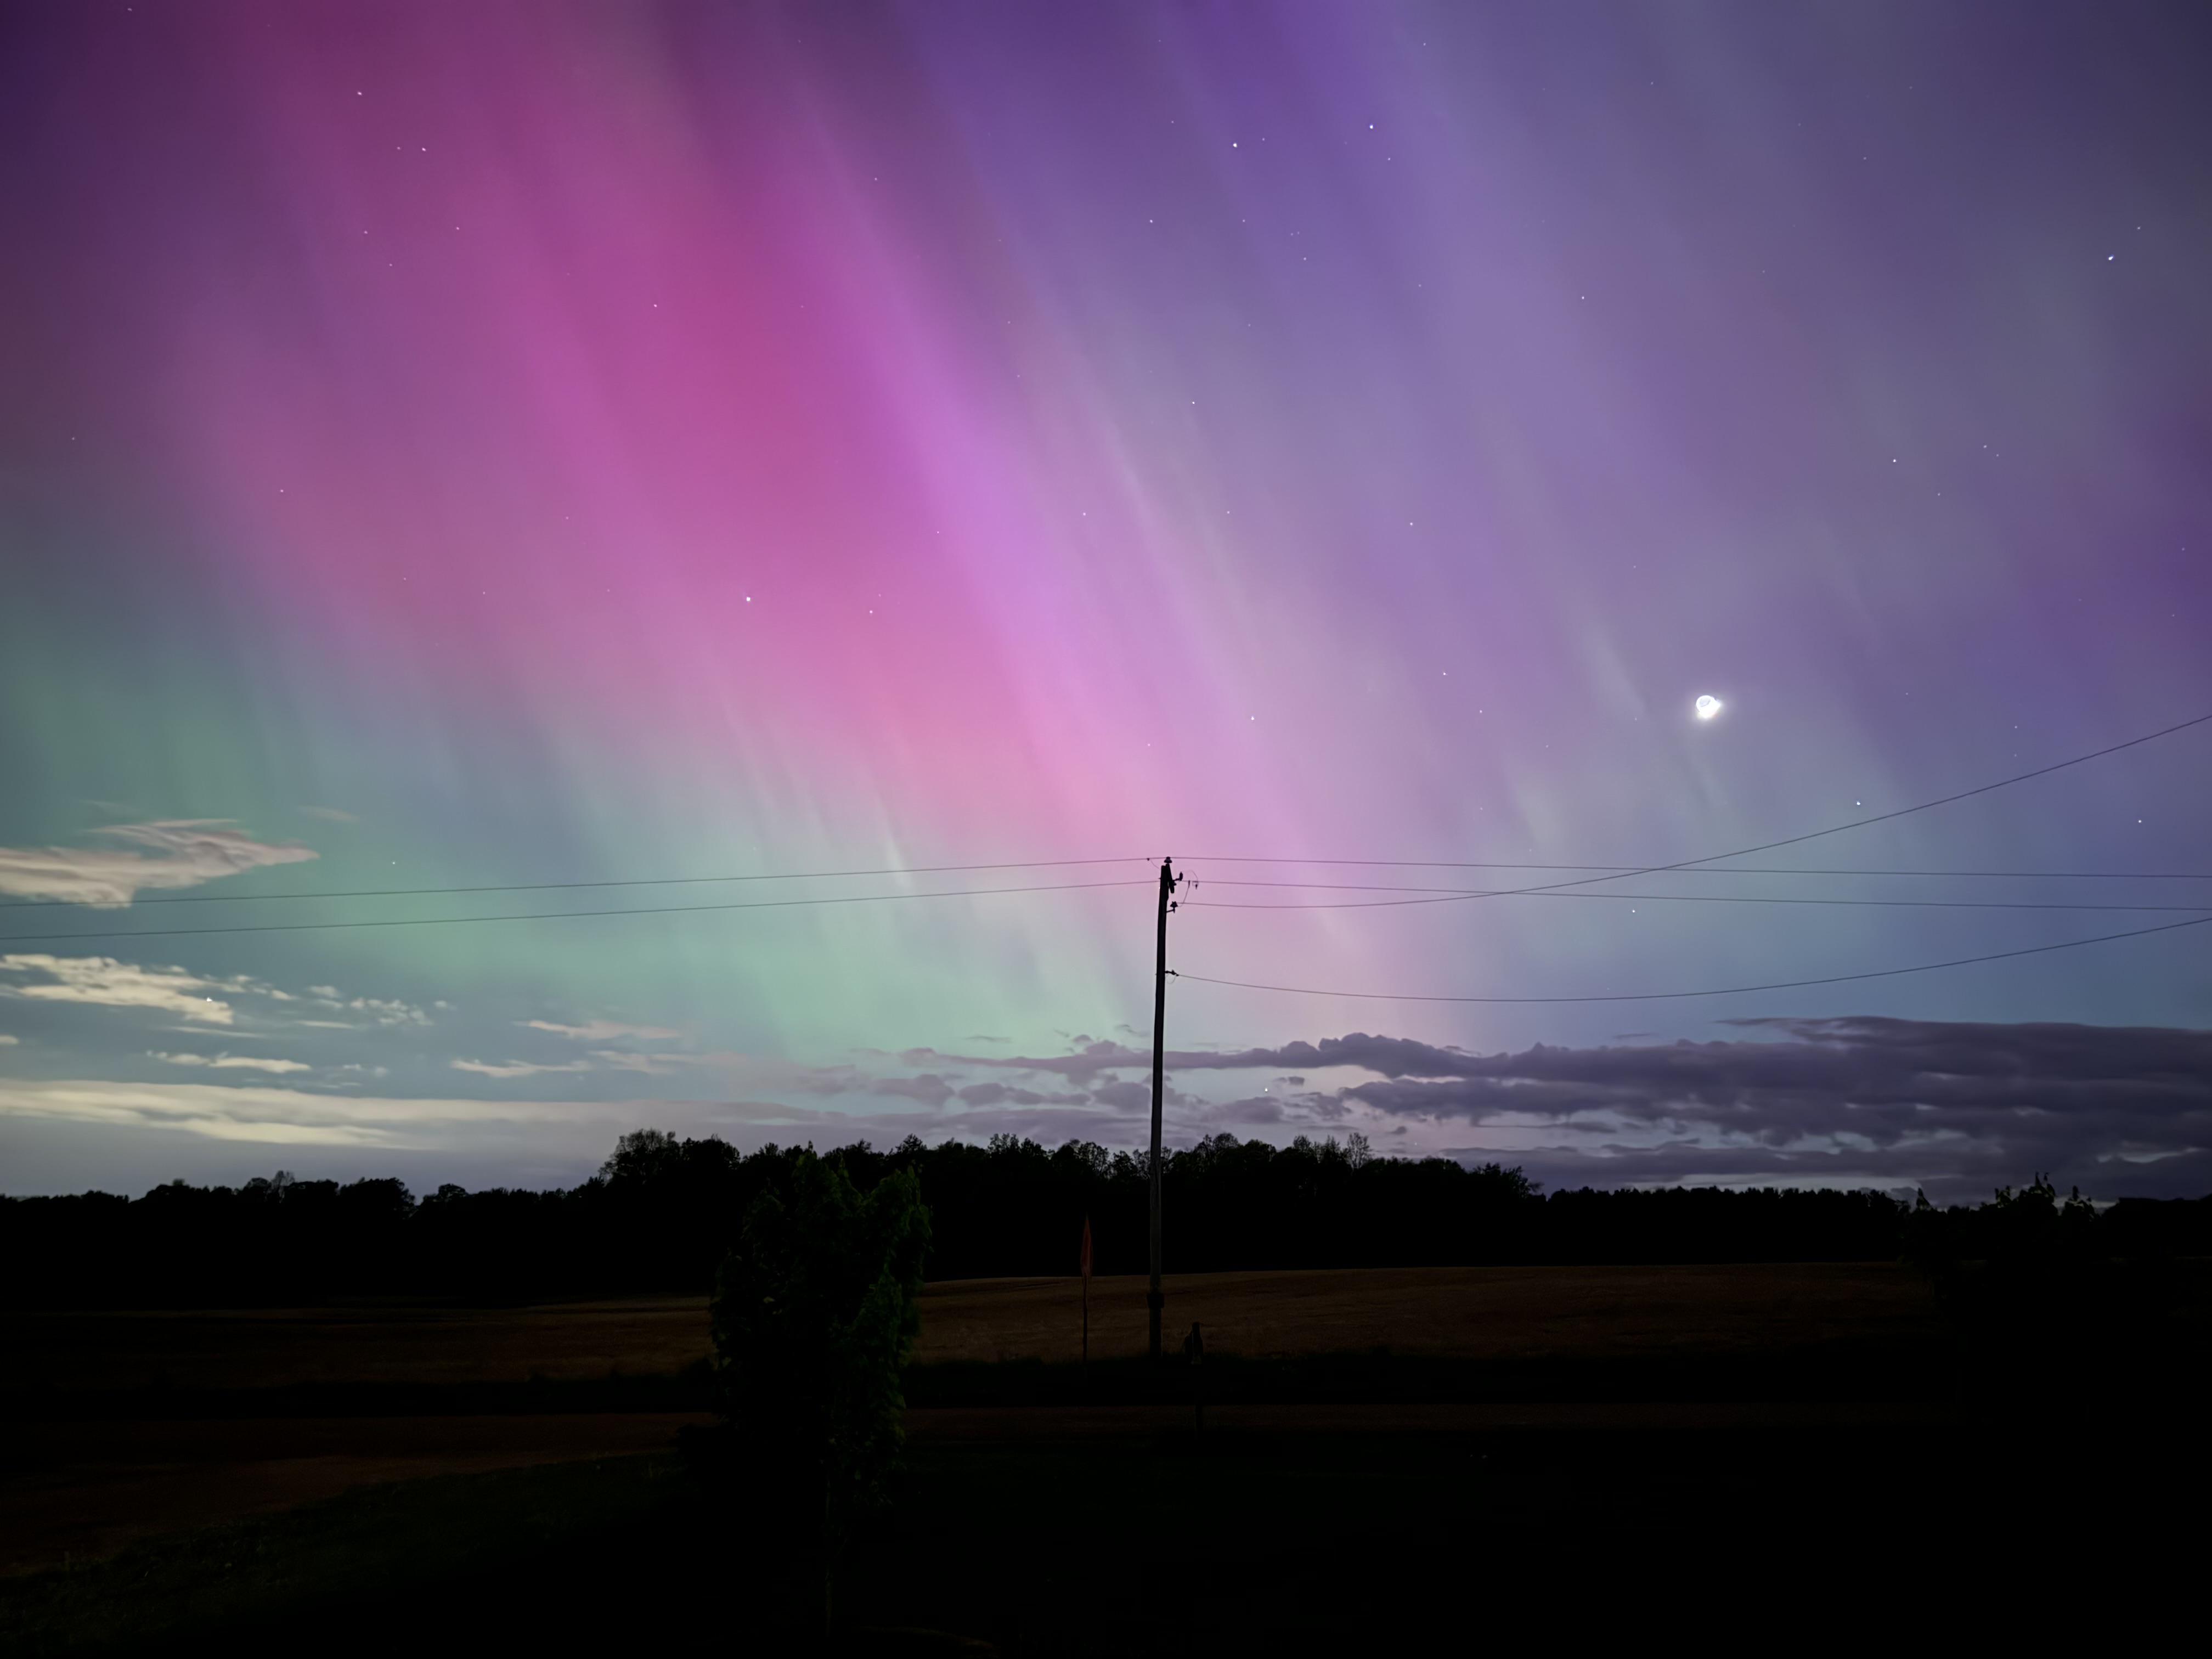 Check out these amazing Northern Lights photos